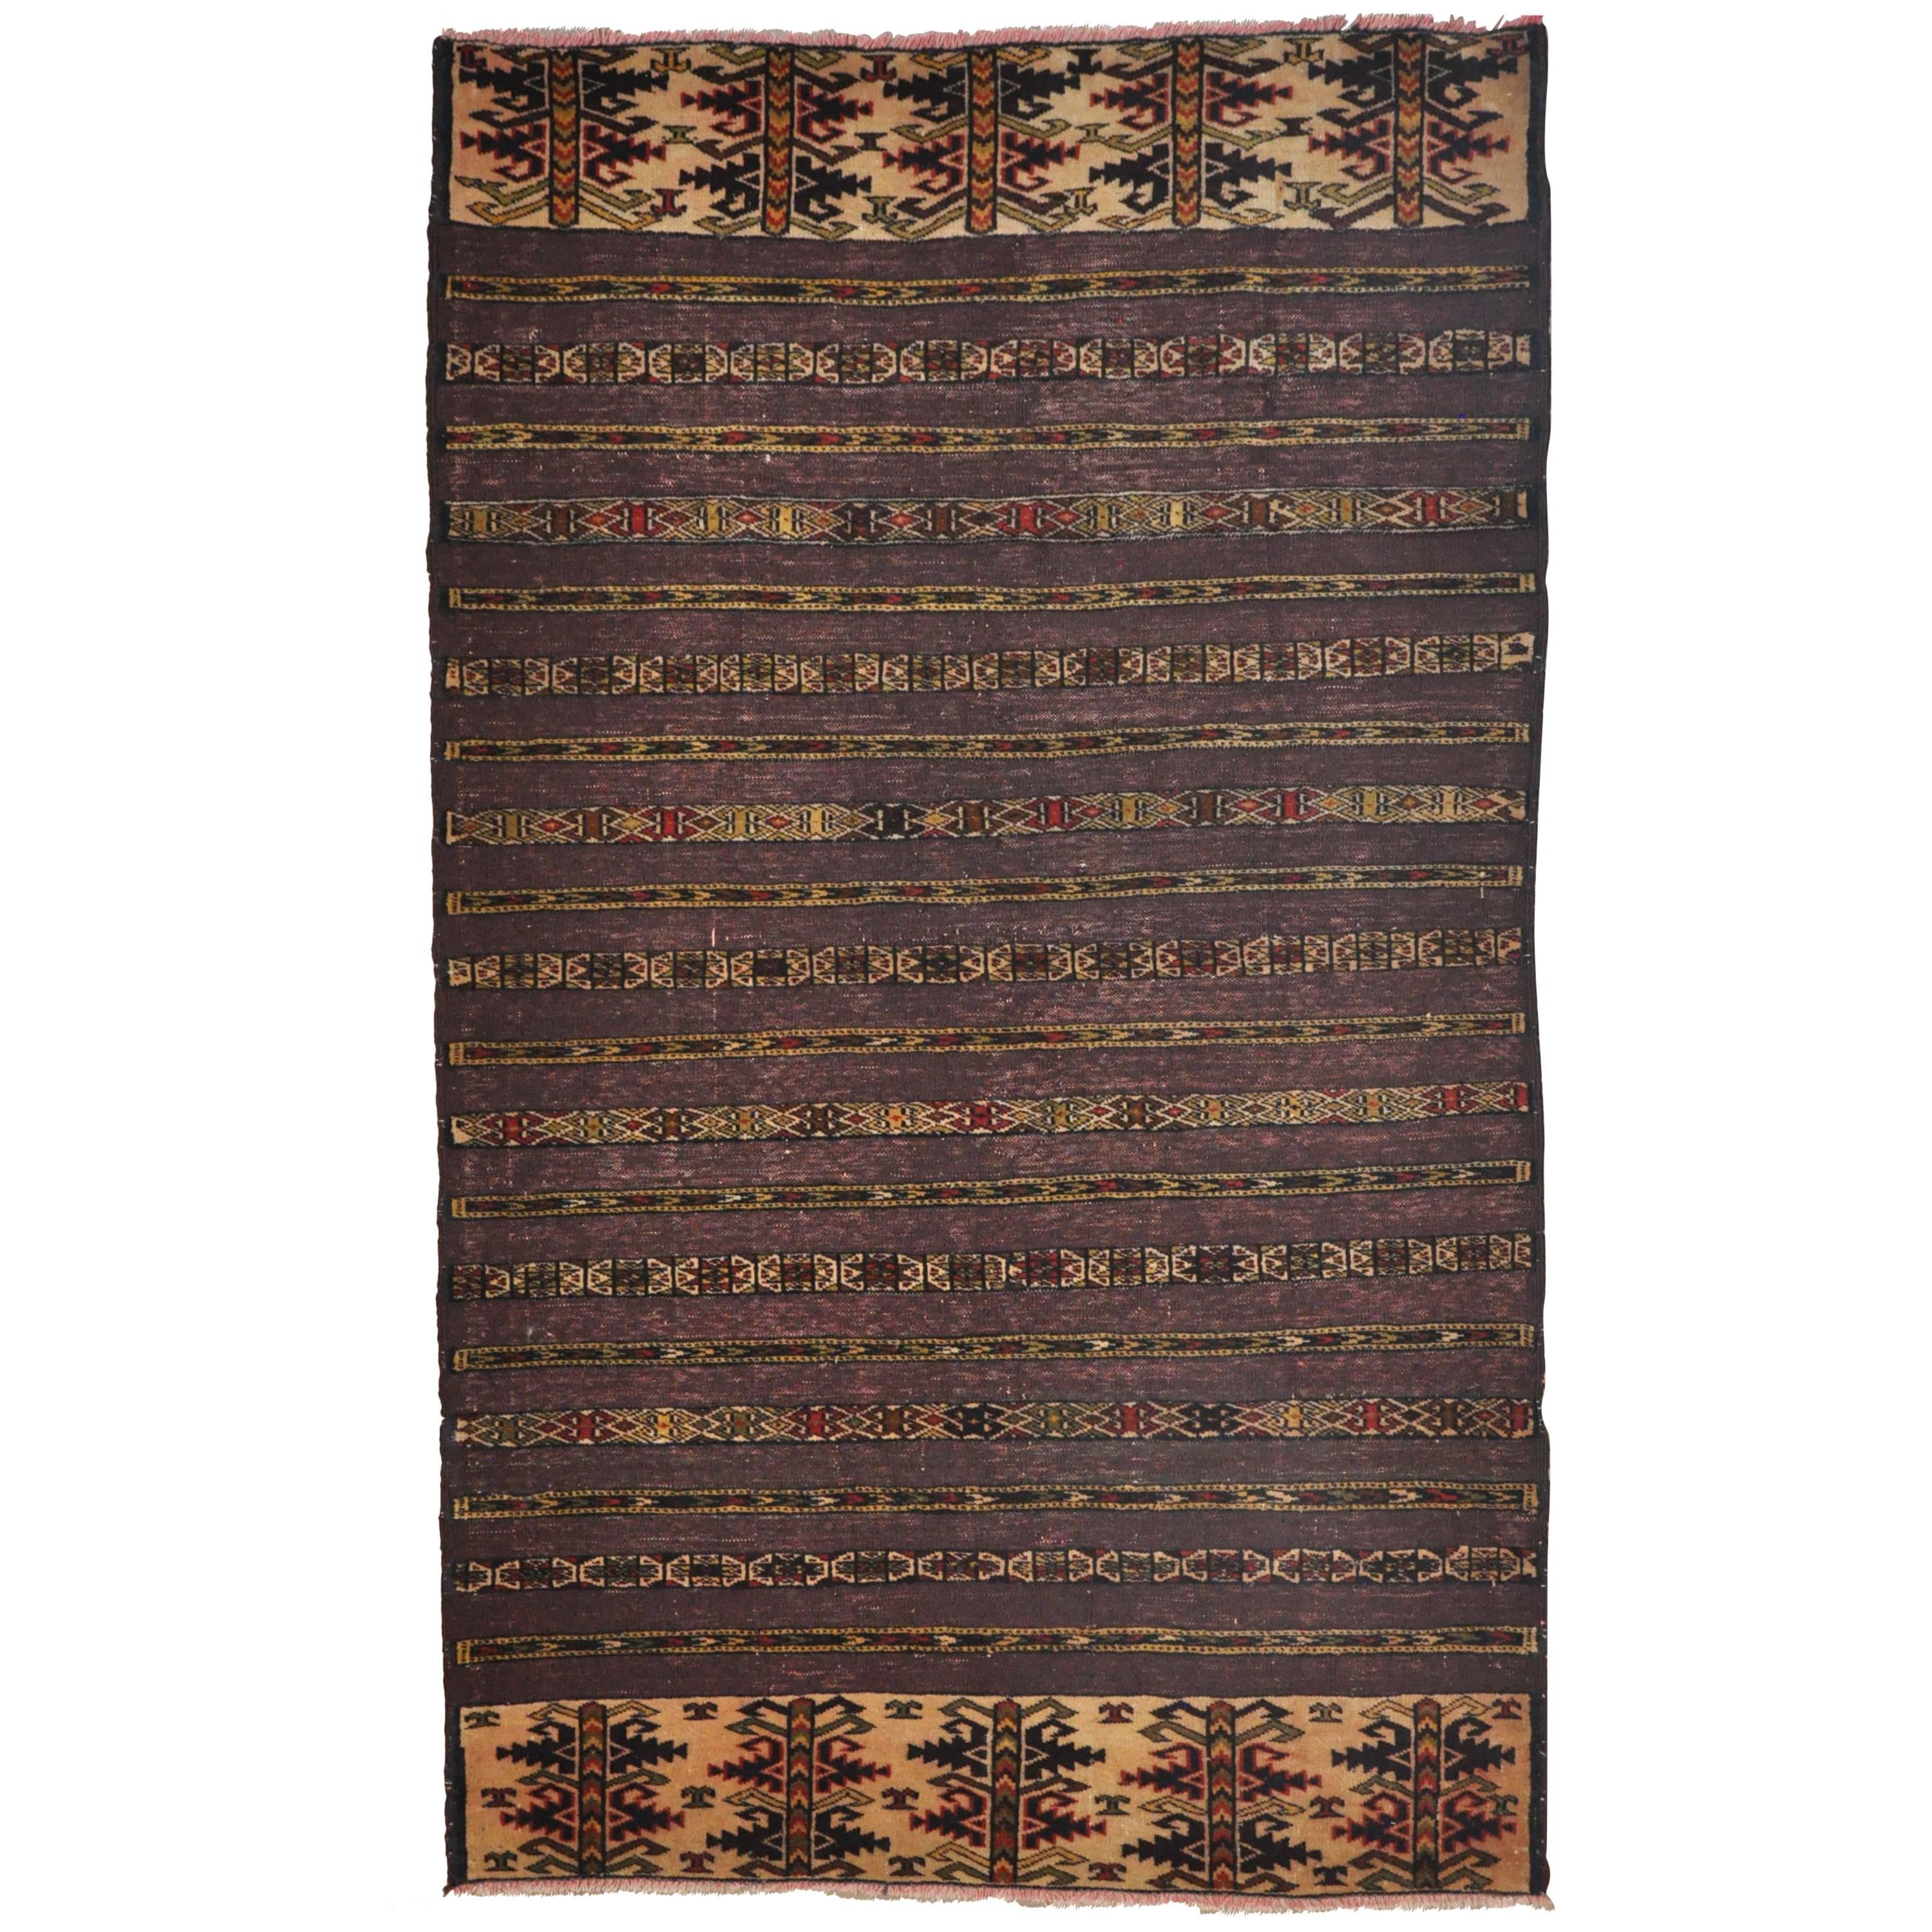 Early 20th Century, Hand-Knotted Afghani Wool Rug